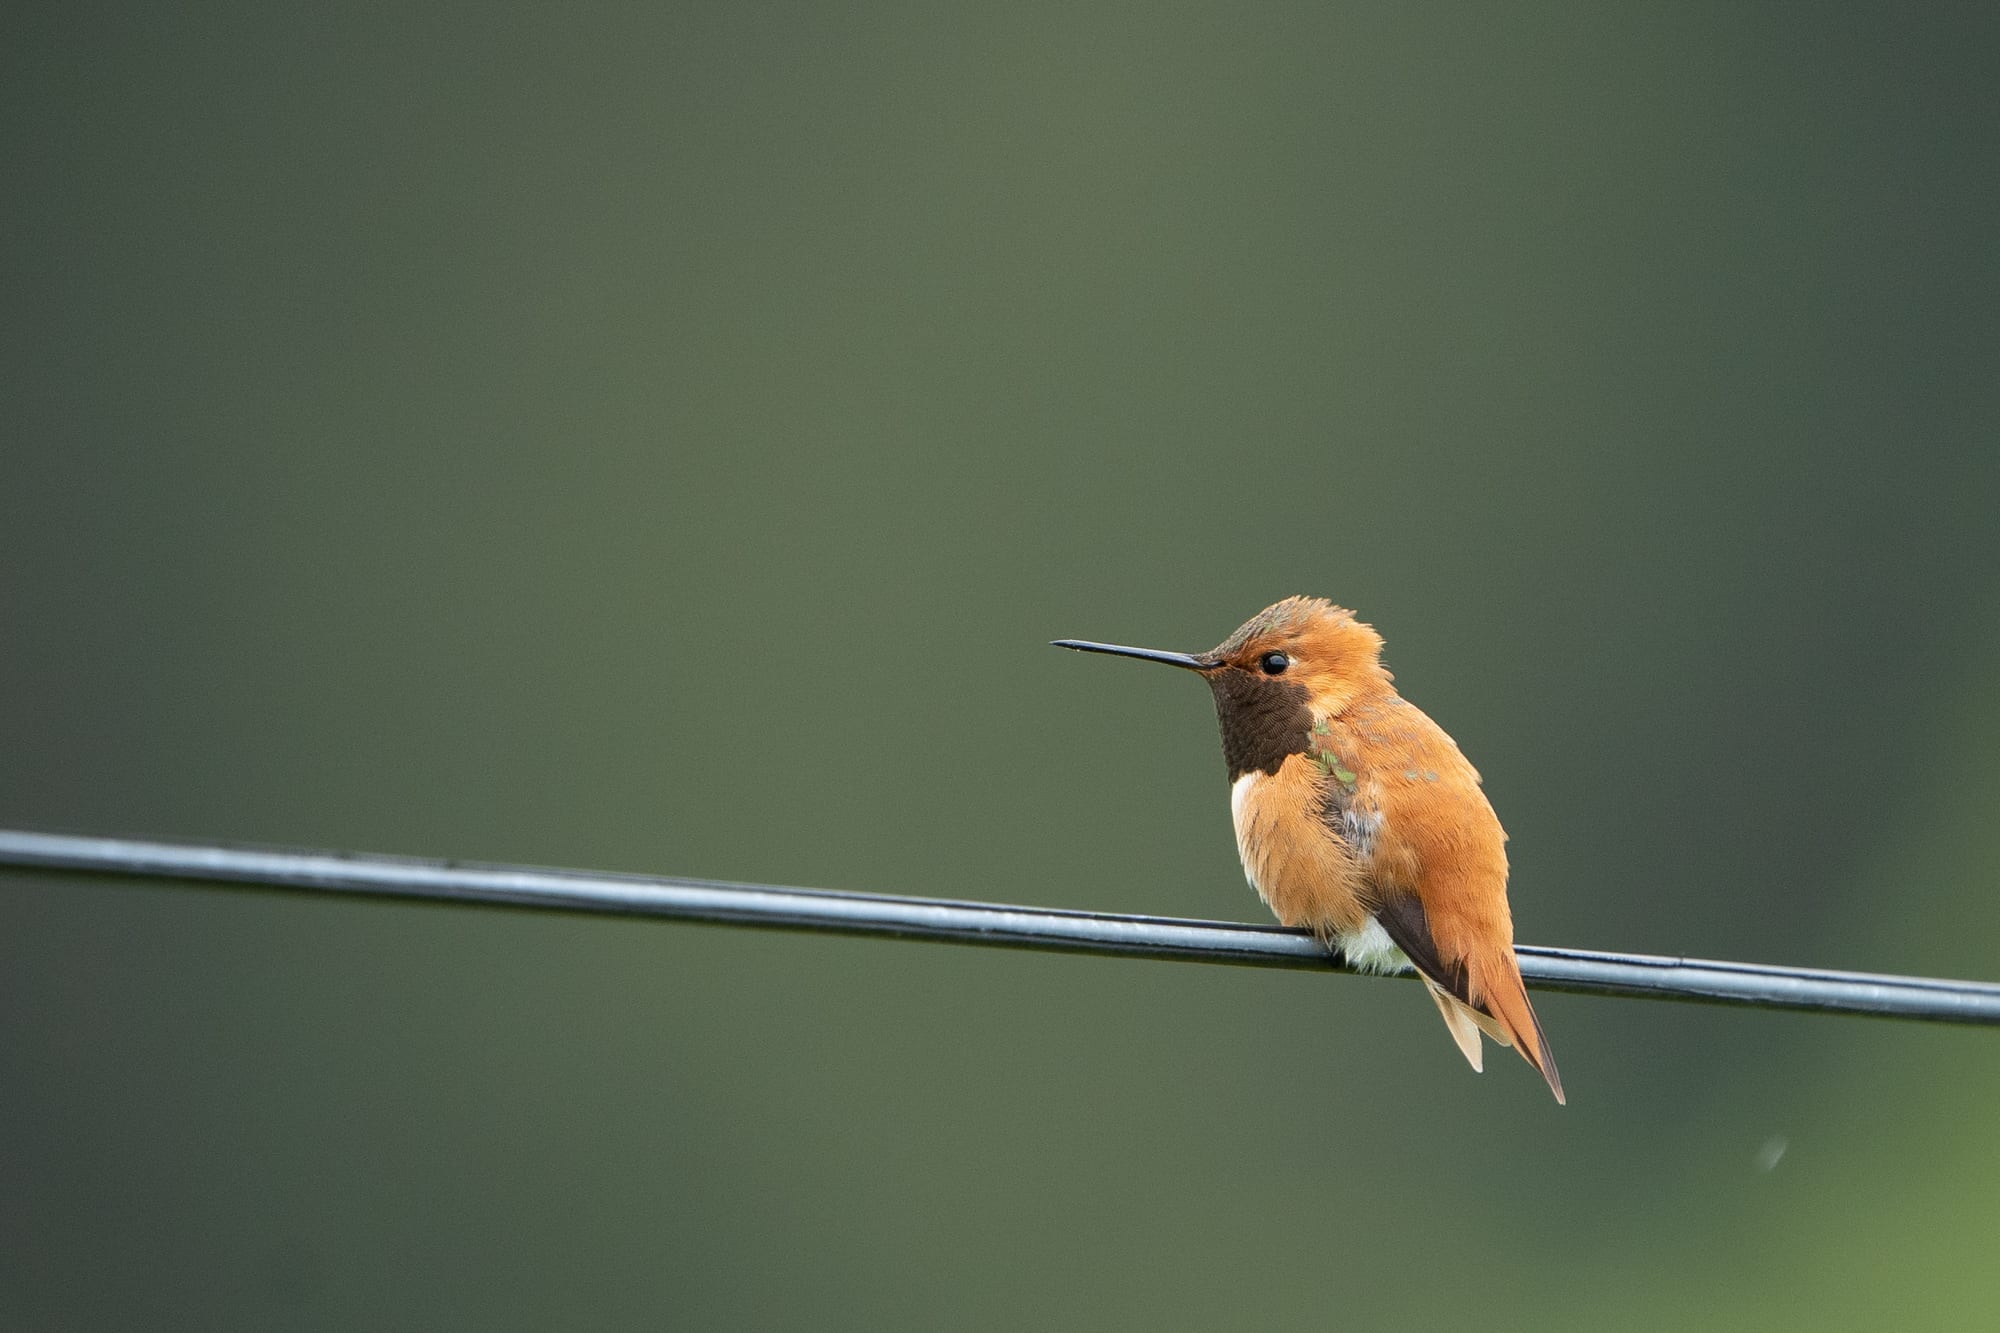 Rufous Hummingbird sits on a telephone wire